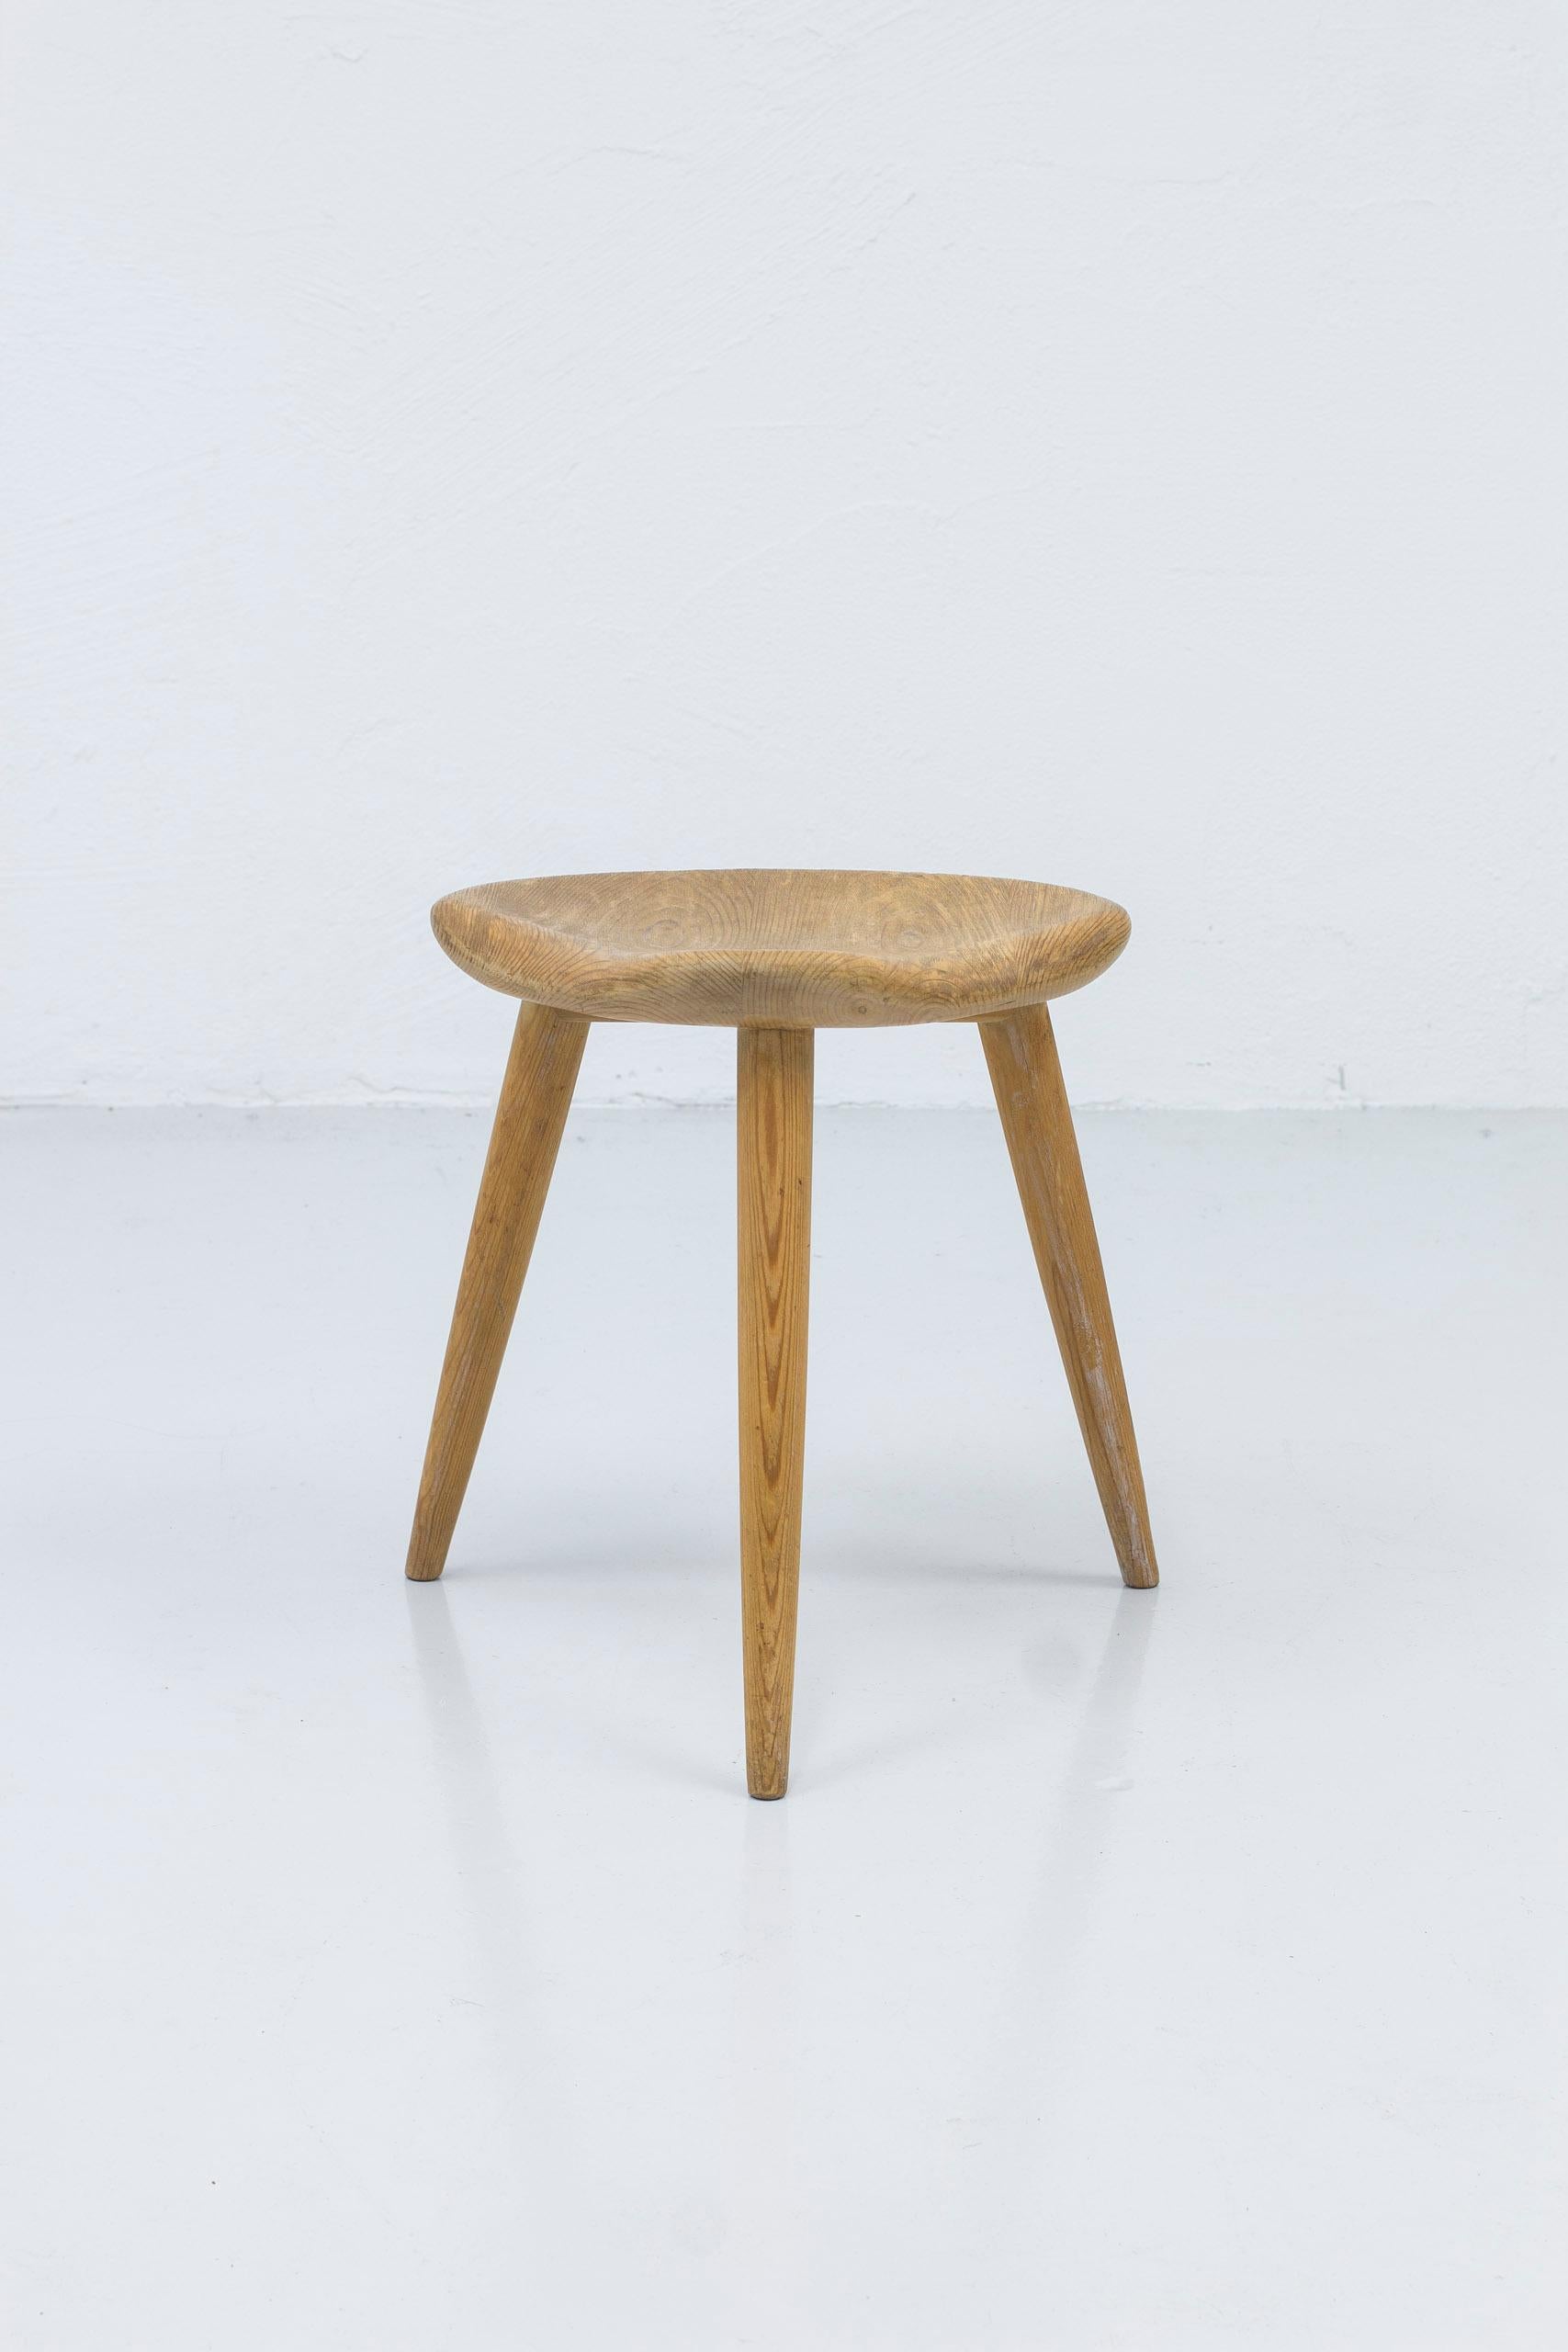 Sportstuge Stool in Solid Pine Made in Norway by Norsk Husflid, circa 1950s For Sale 1